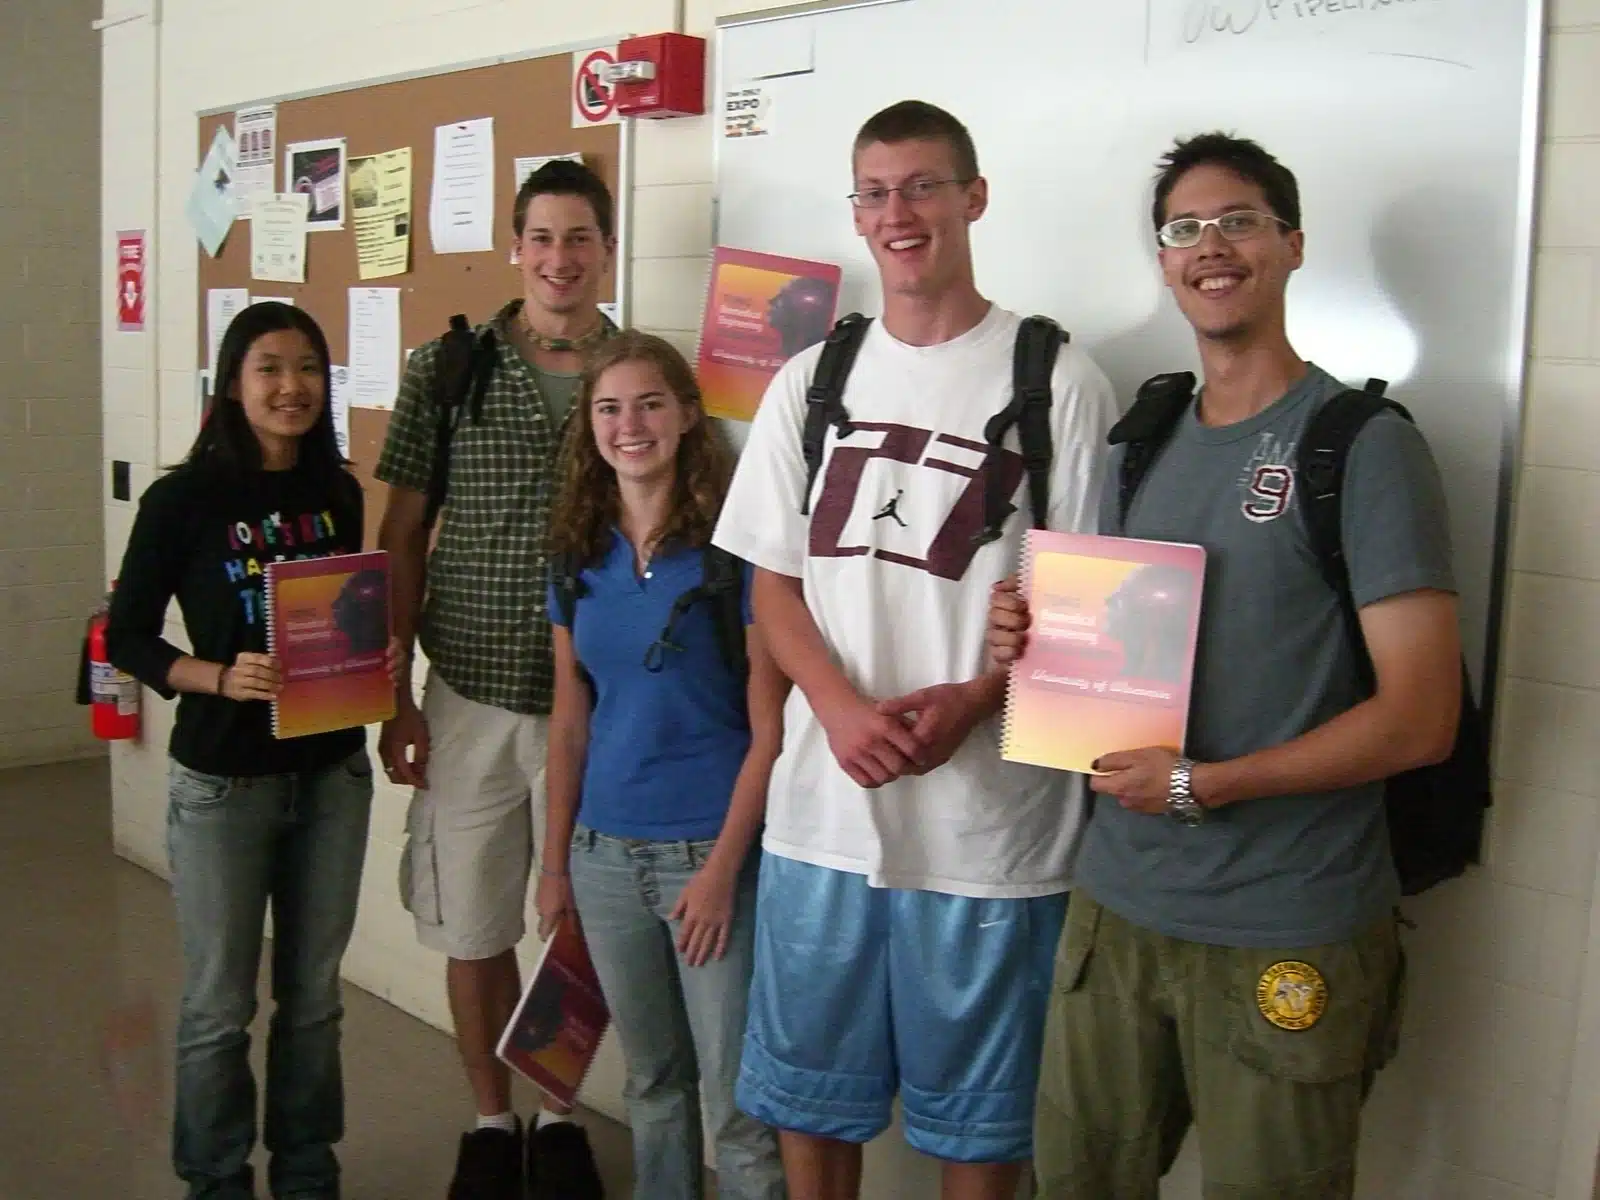 A group of people standing in front of a bulletin board.